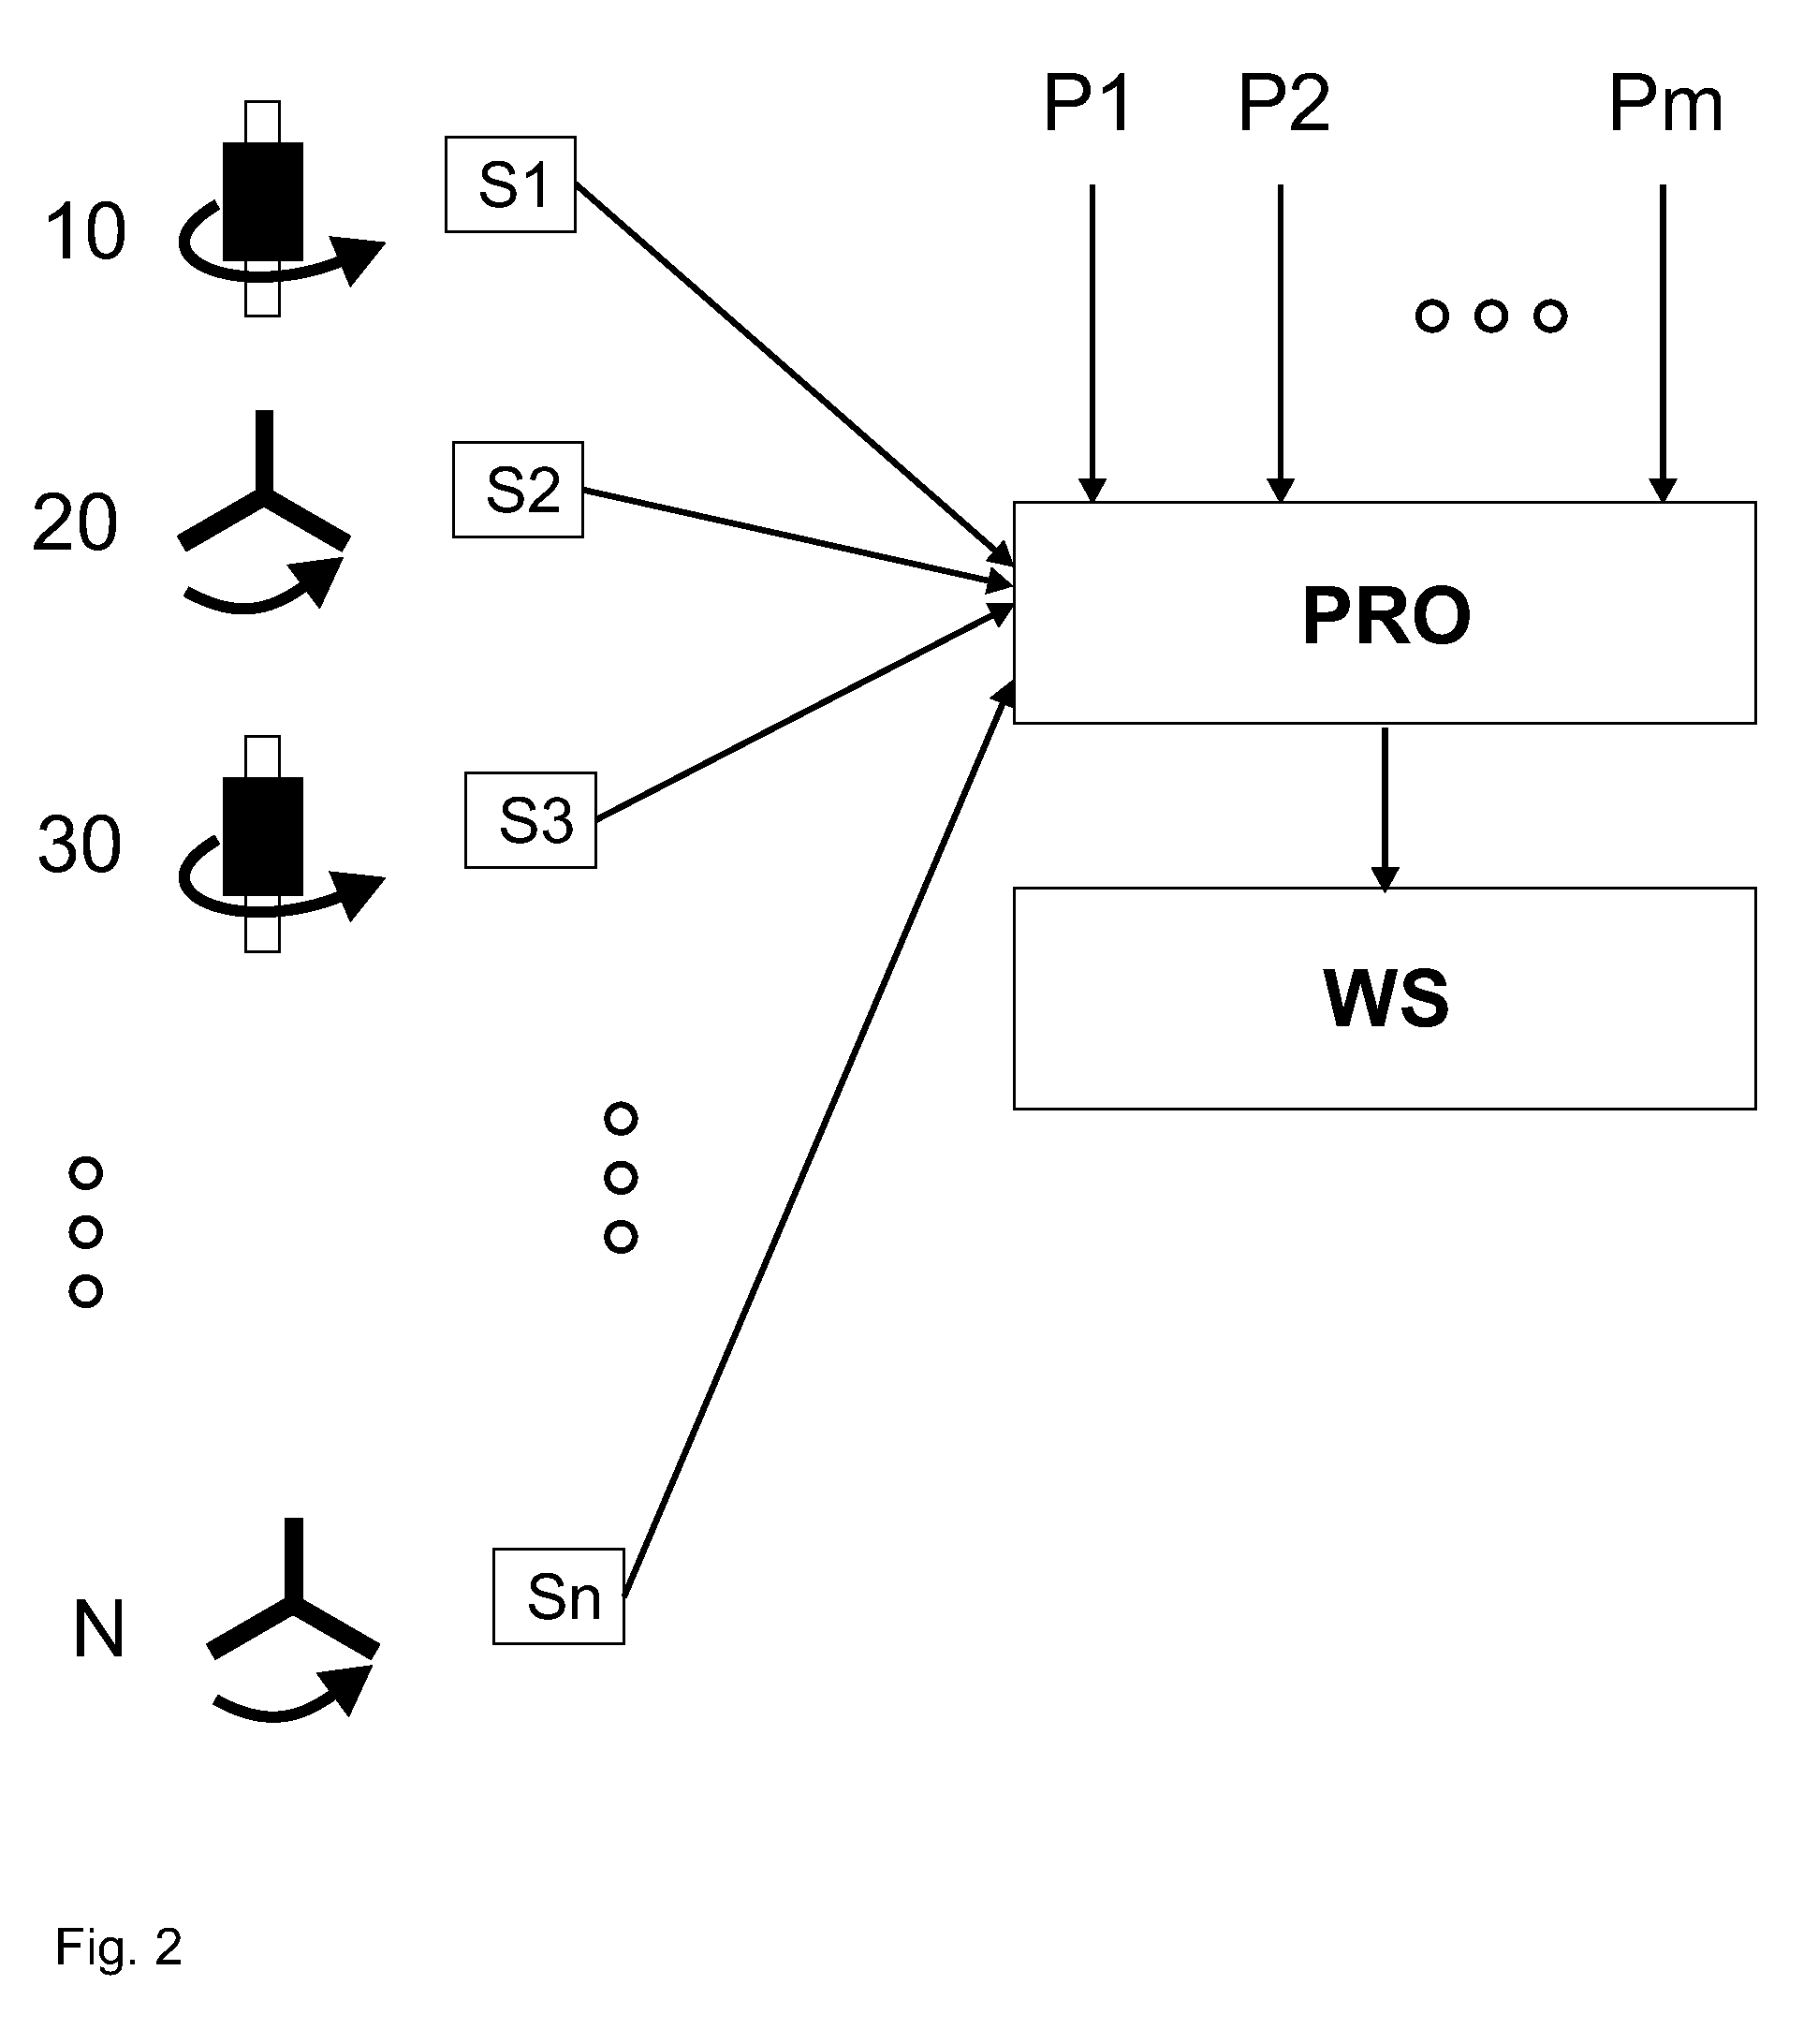 Detection system for detection of damages on rotating components of components of aircraft and method of operating such a detection system